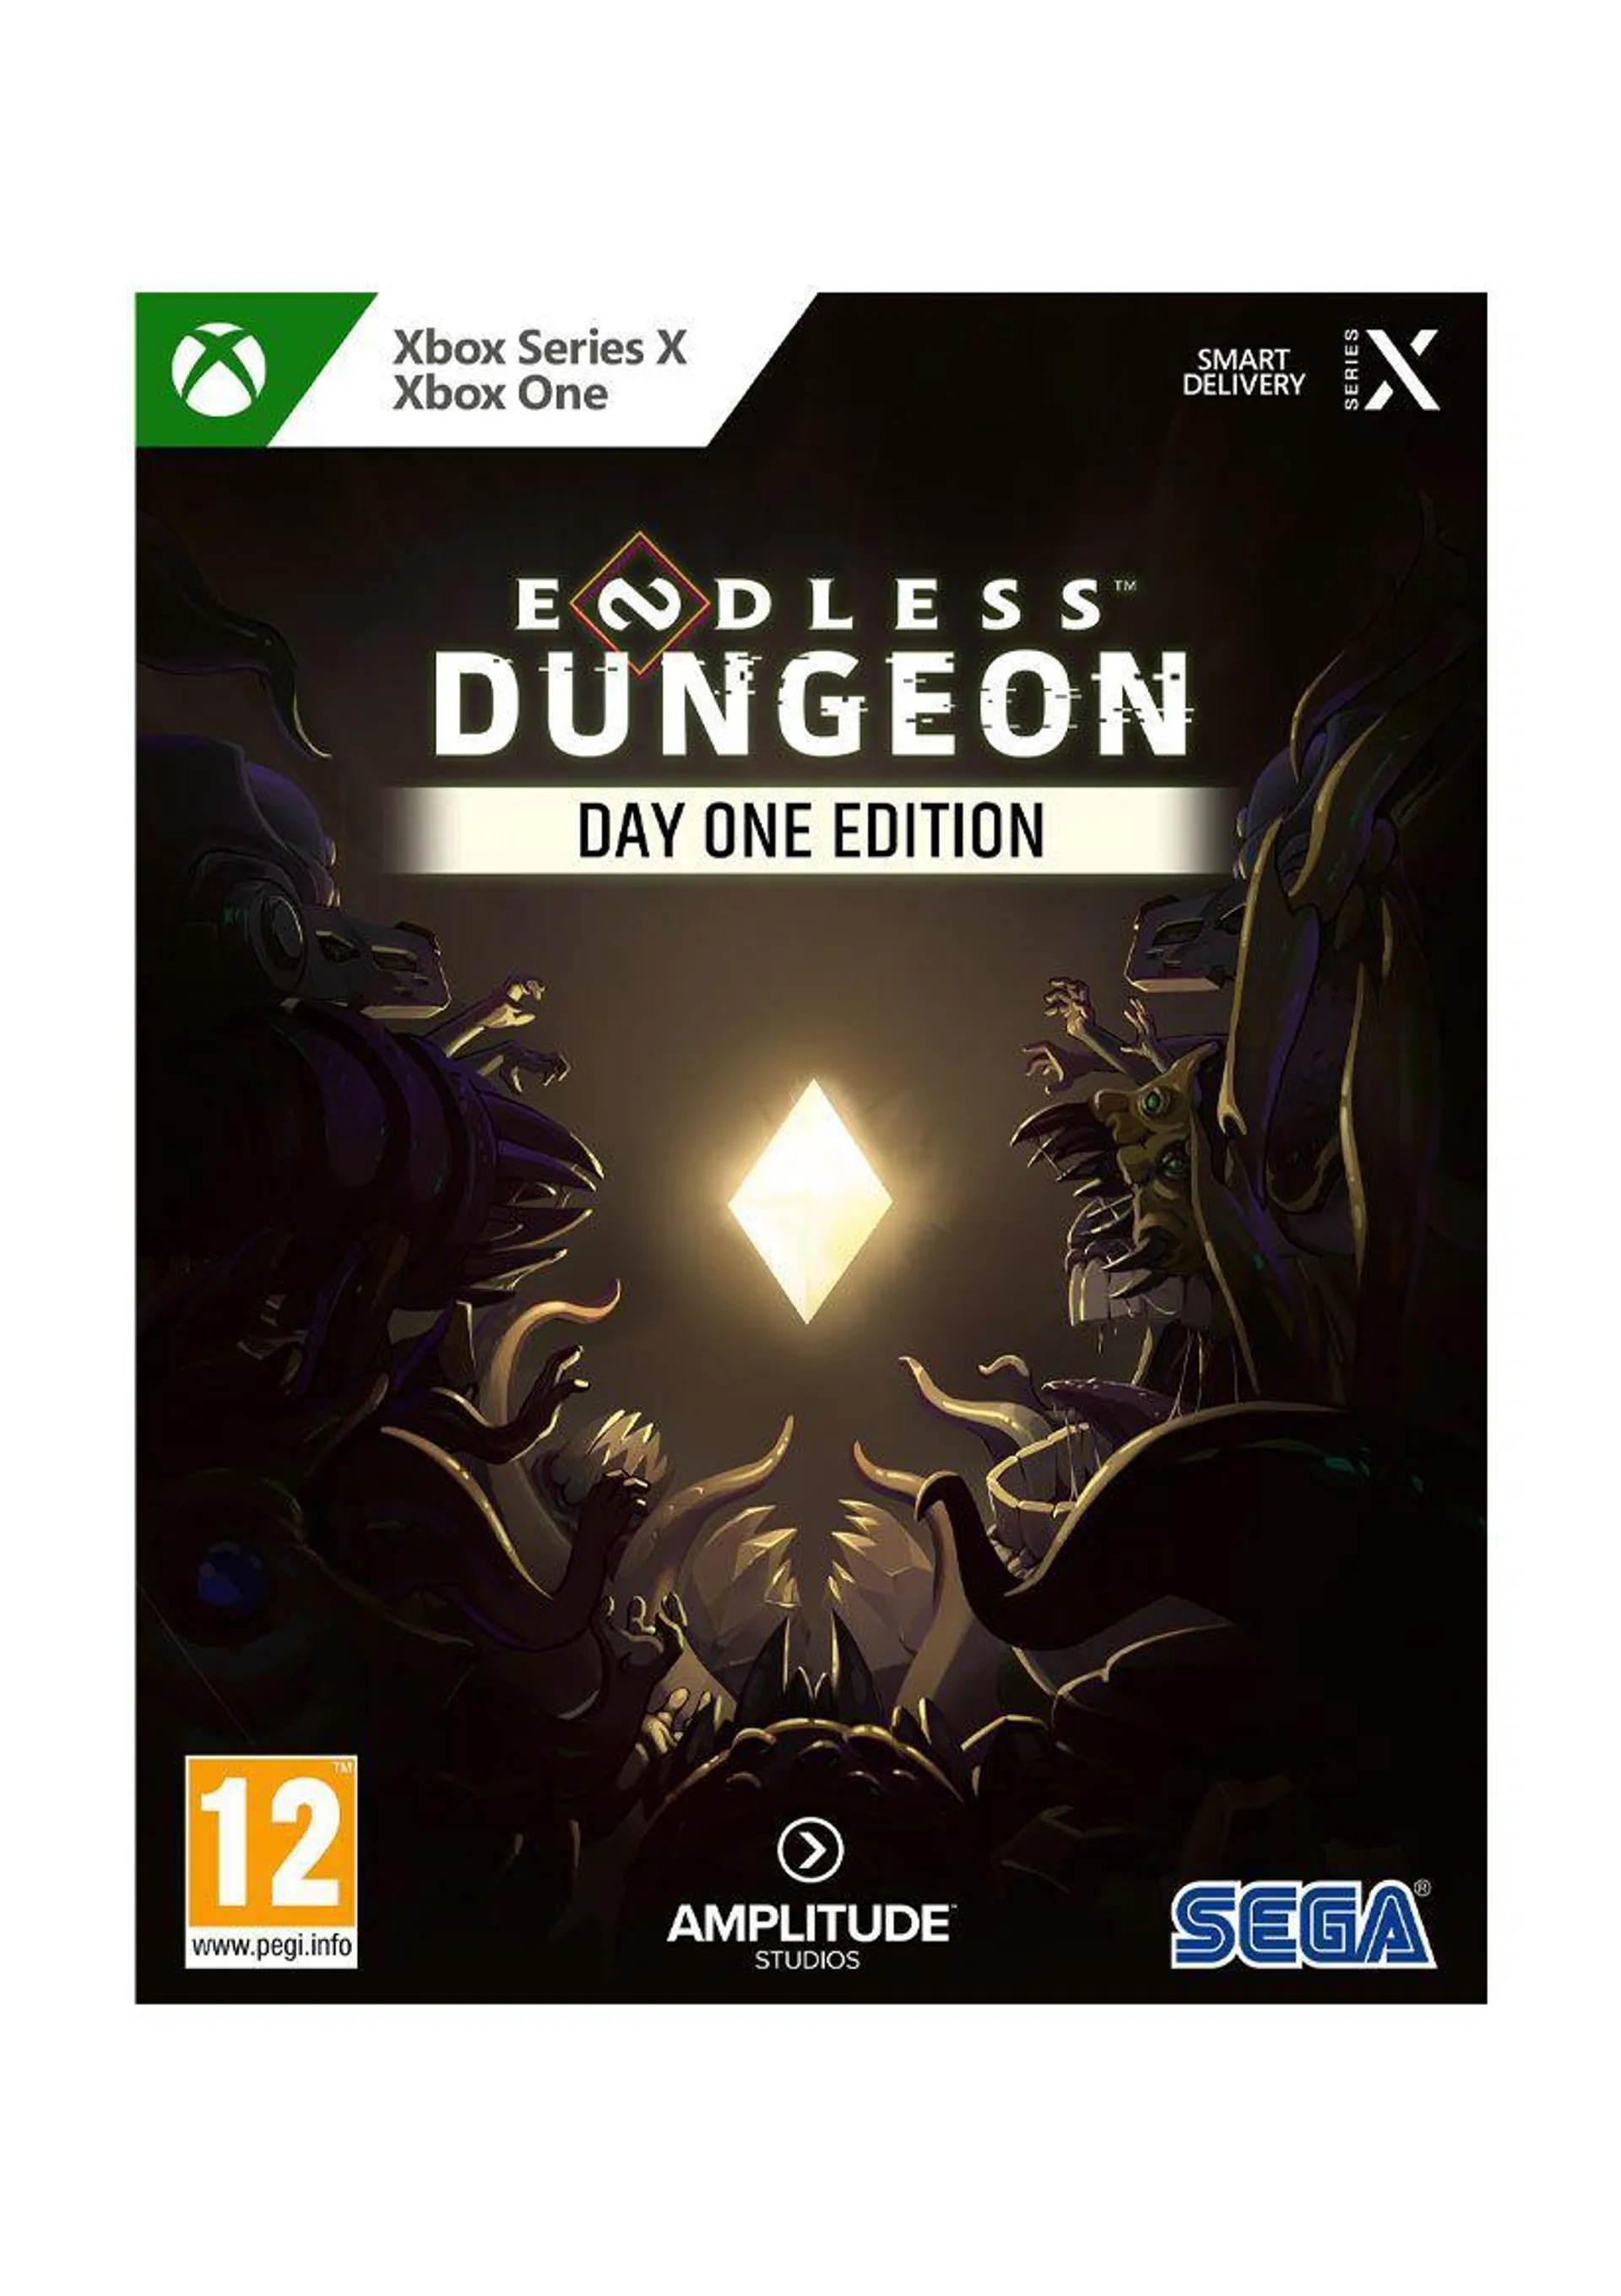 Endless Dungeon Day One Edition on Xbox Series X | S